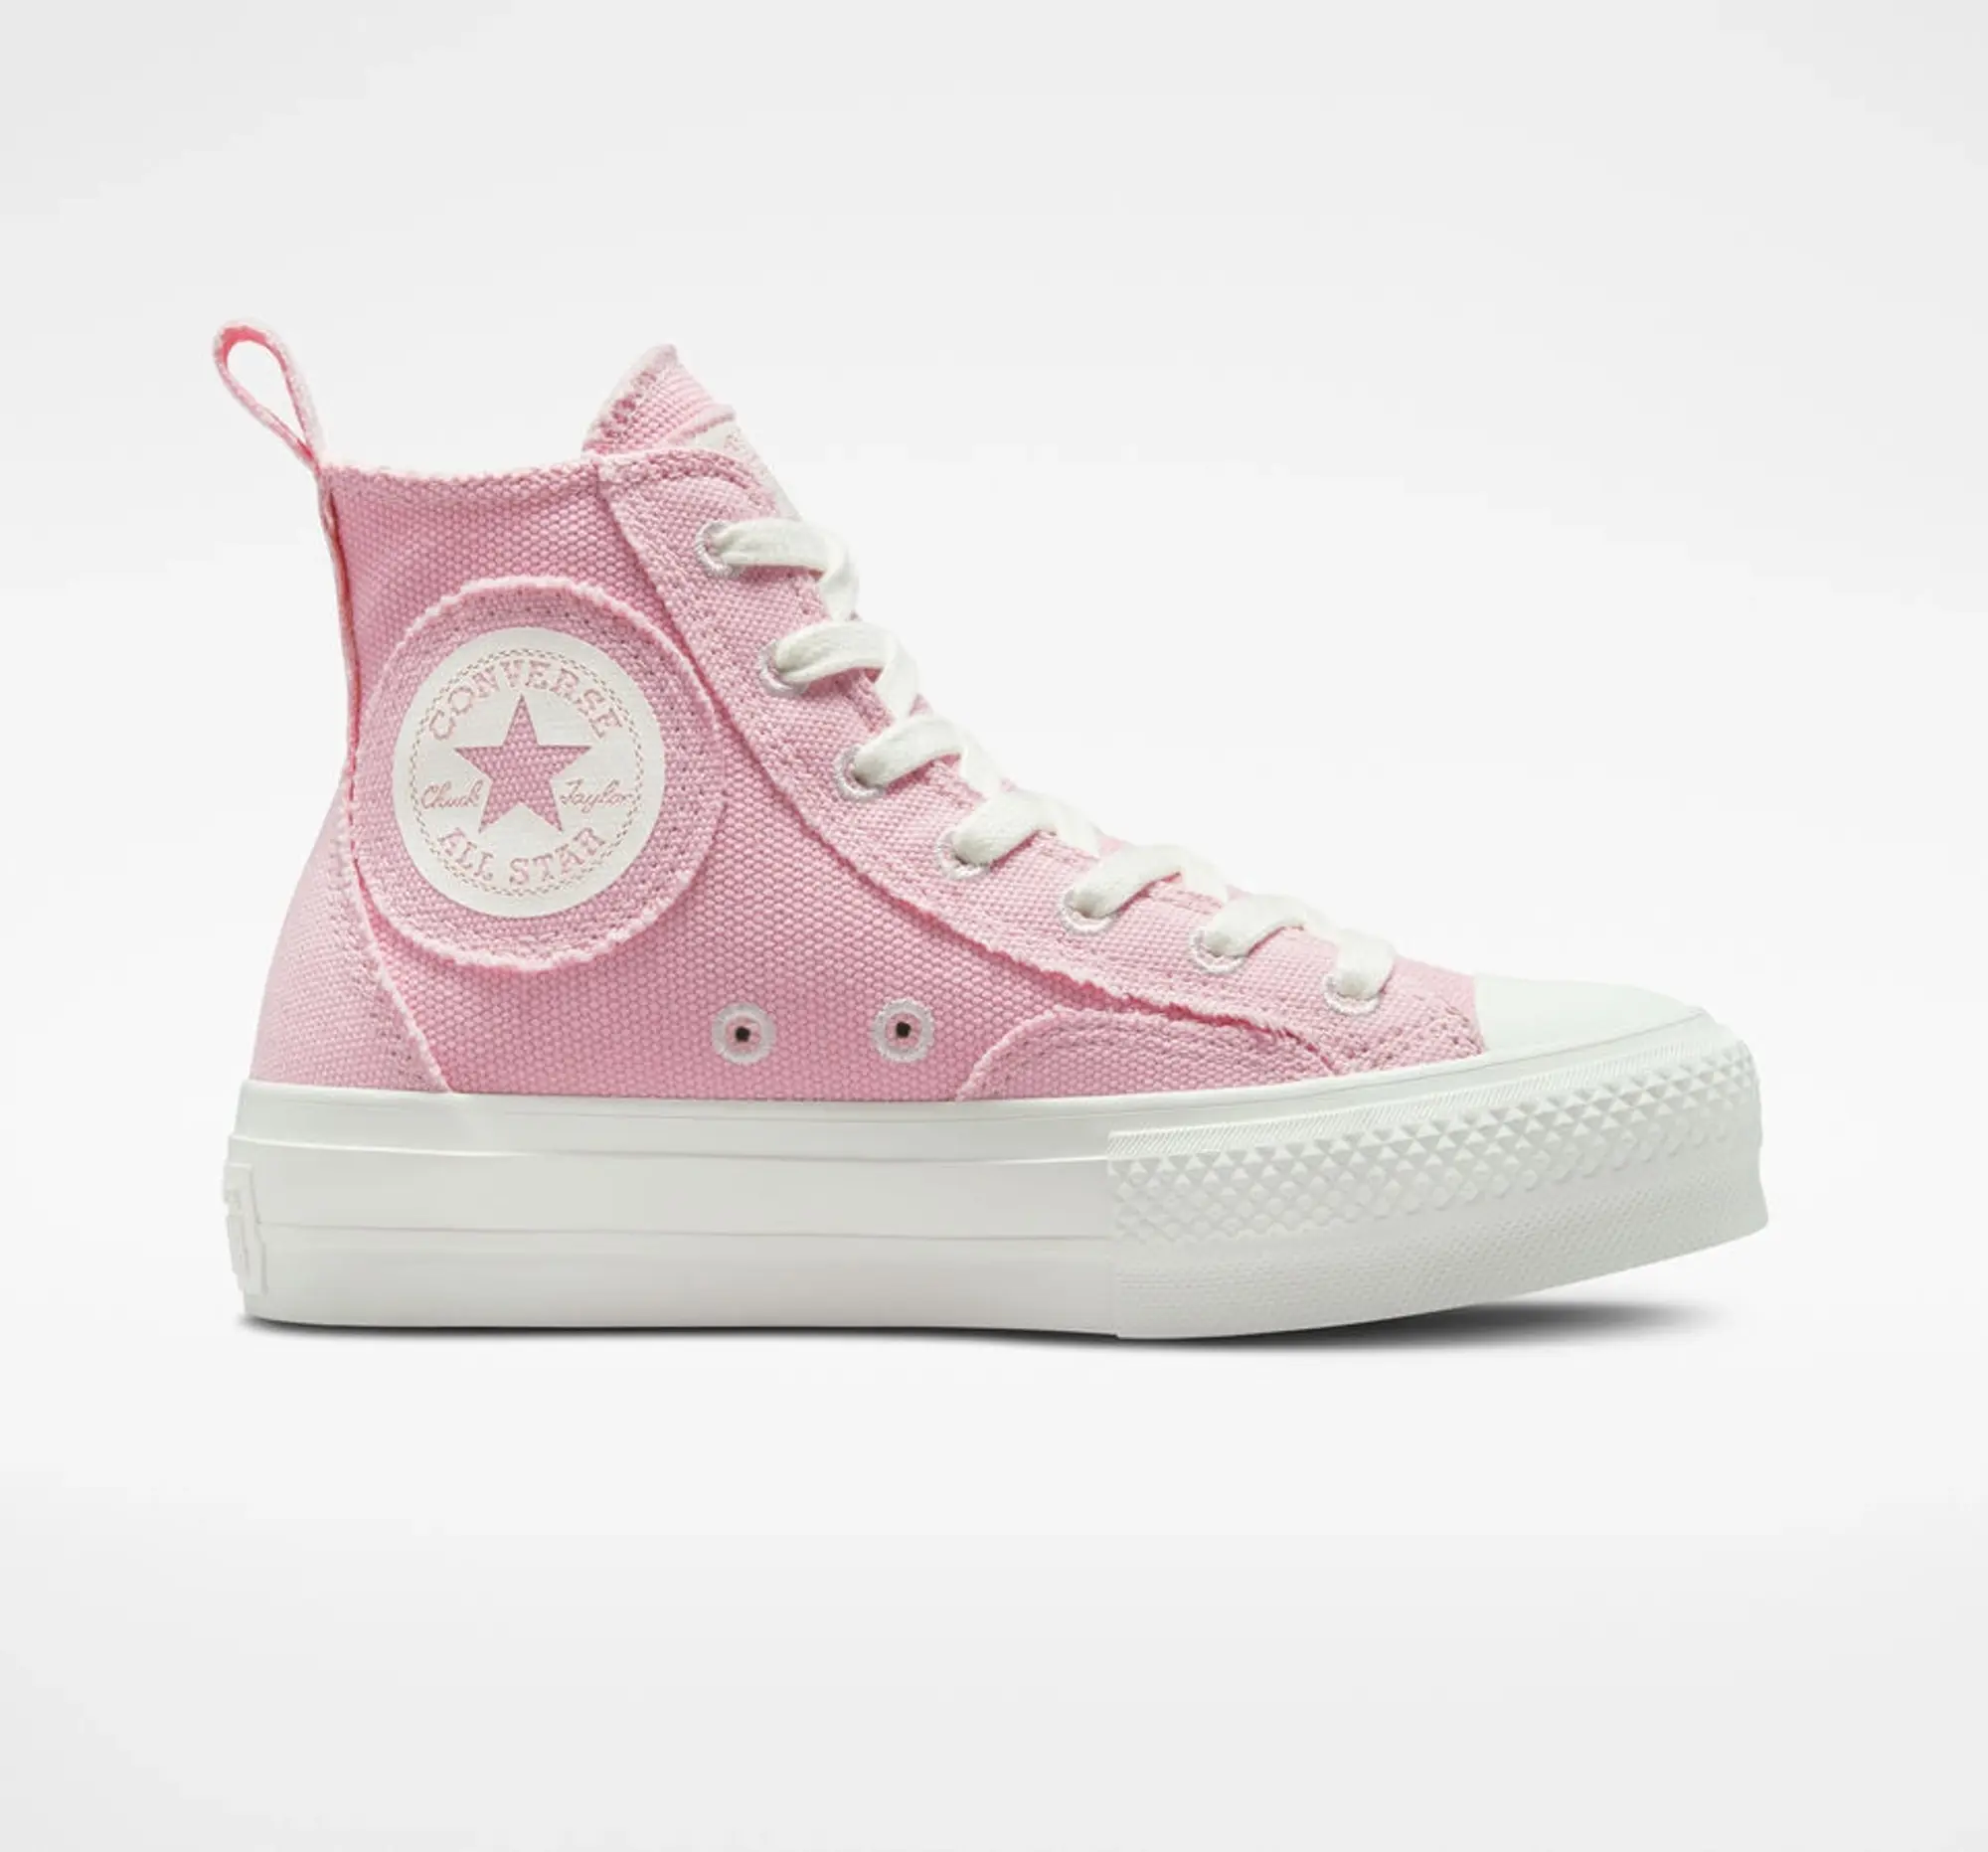 Converse all star lift hi trainers in white & pink